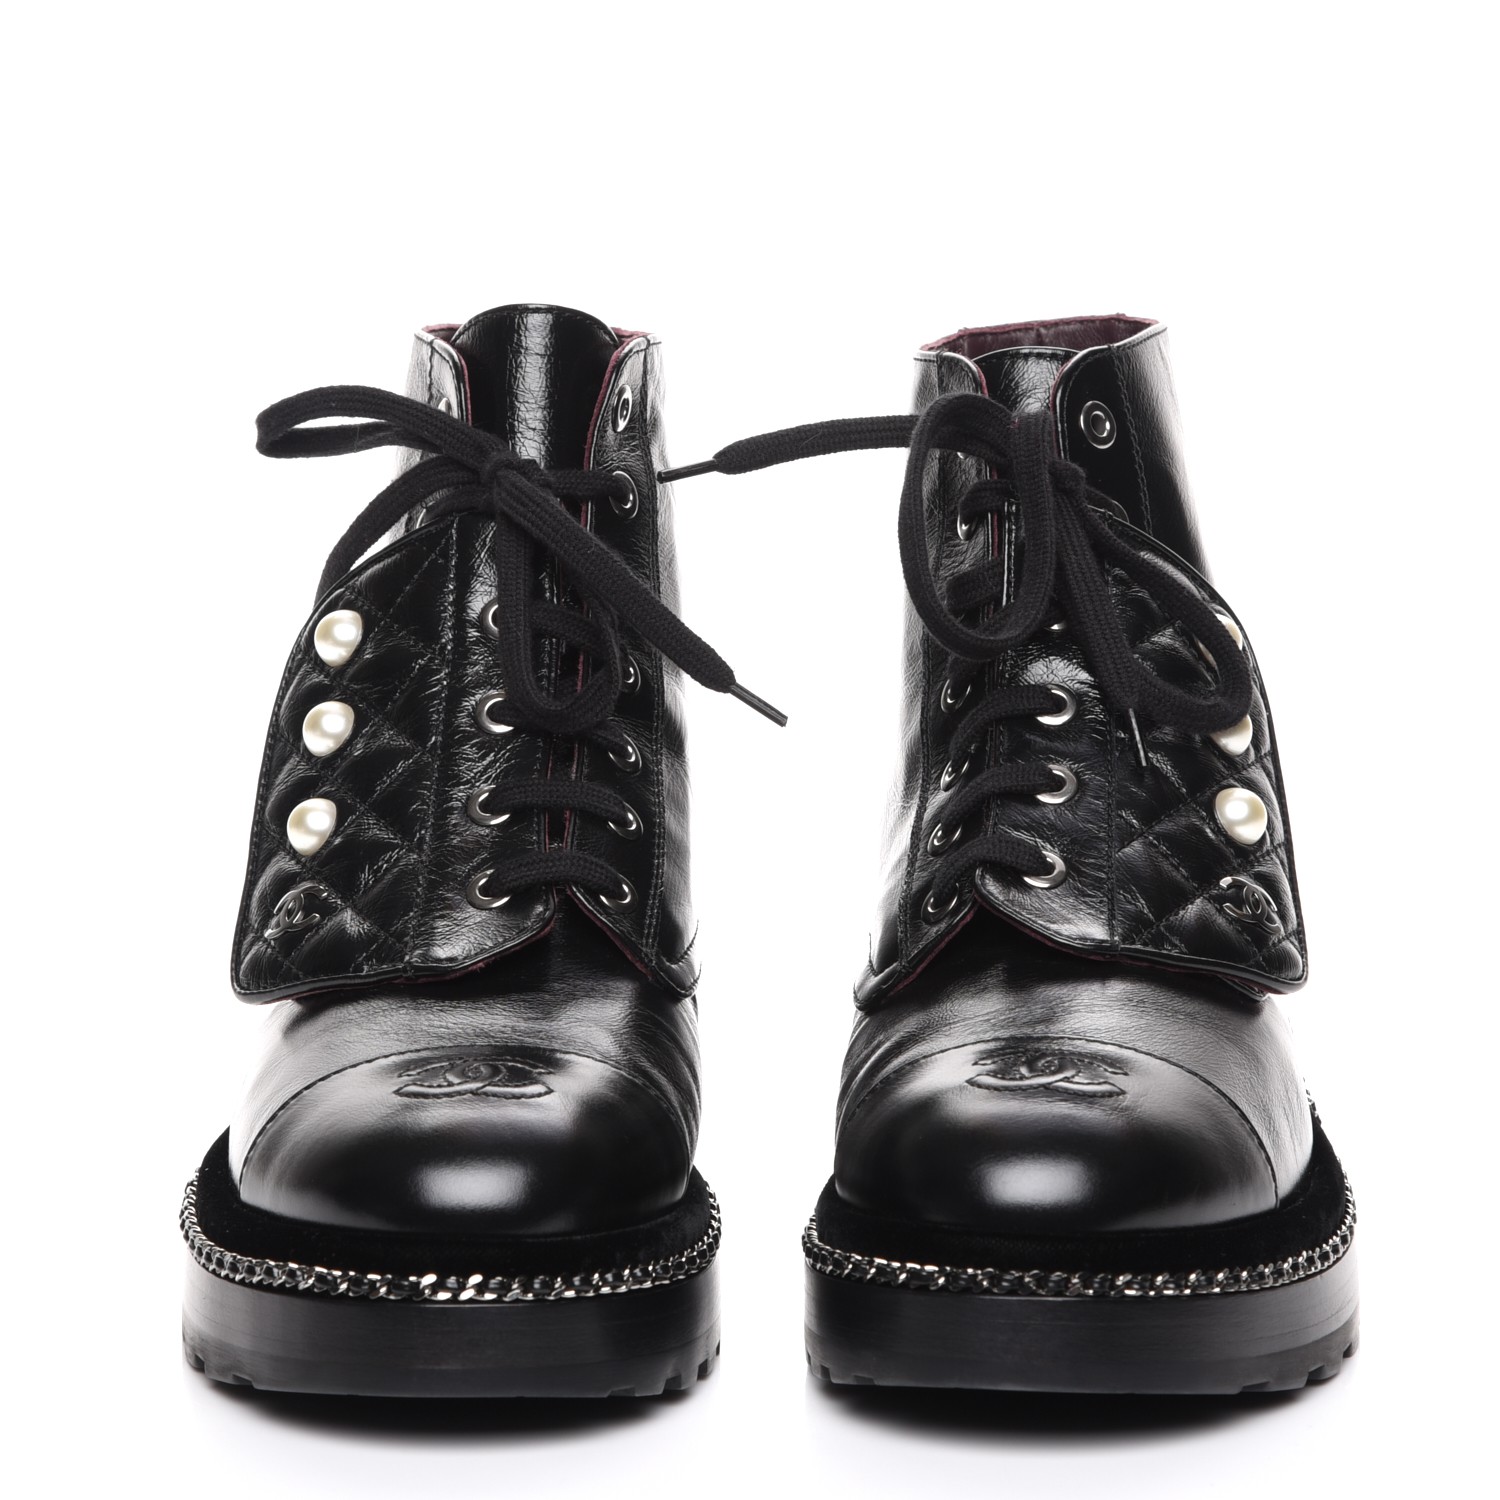 chanel combat boots with pearls